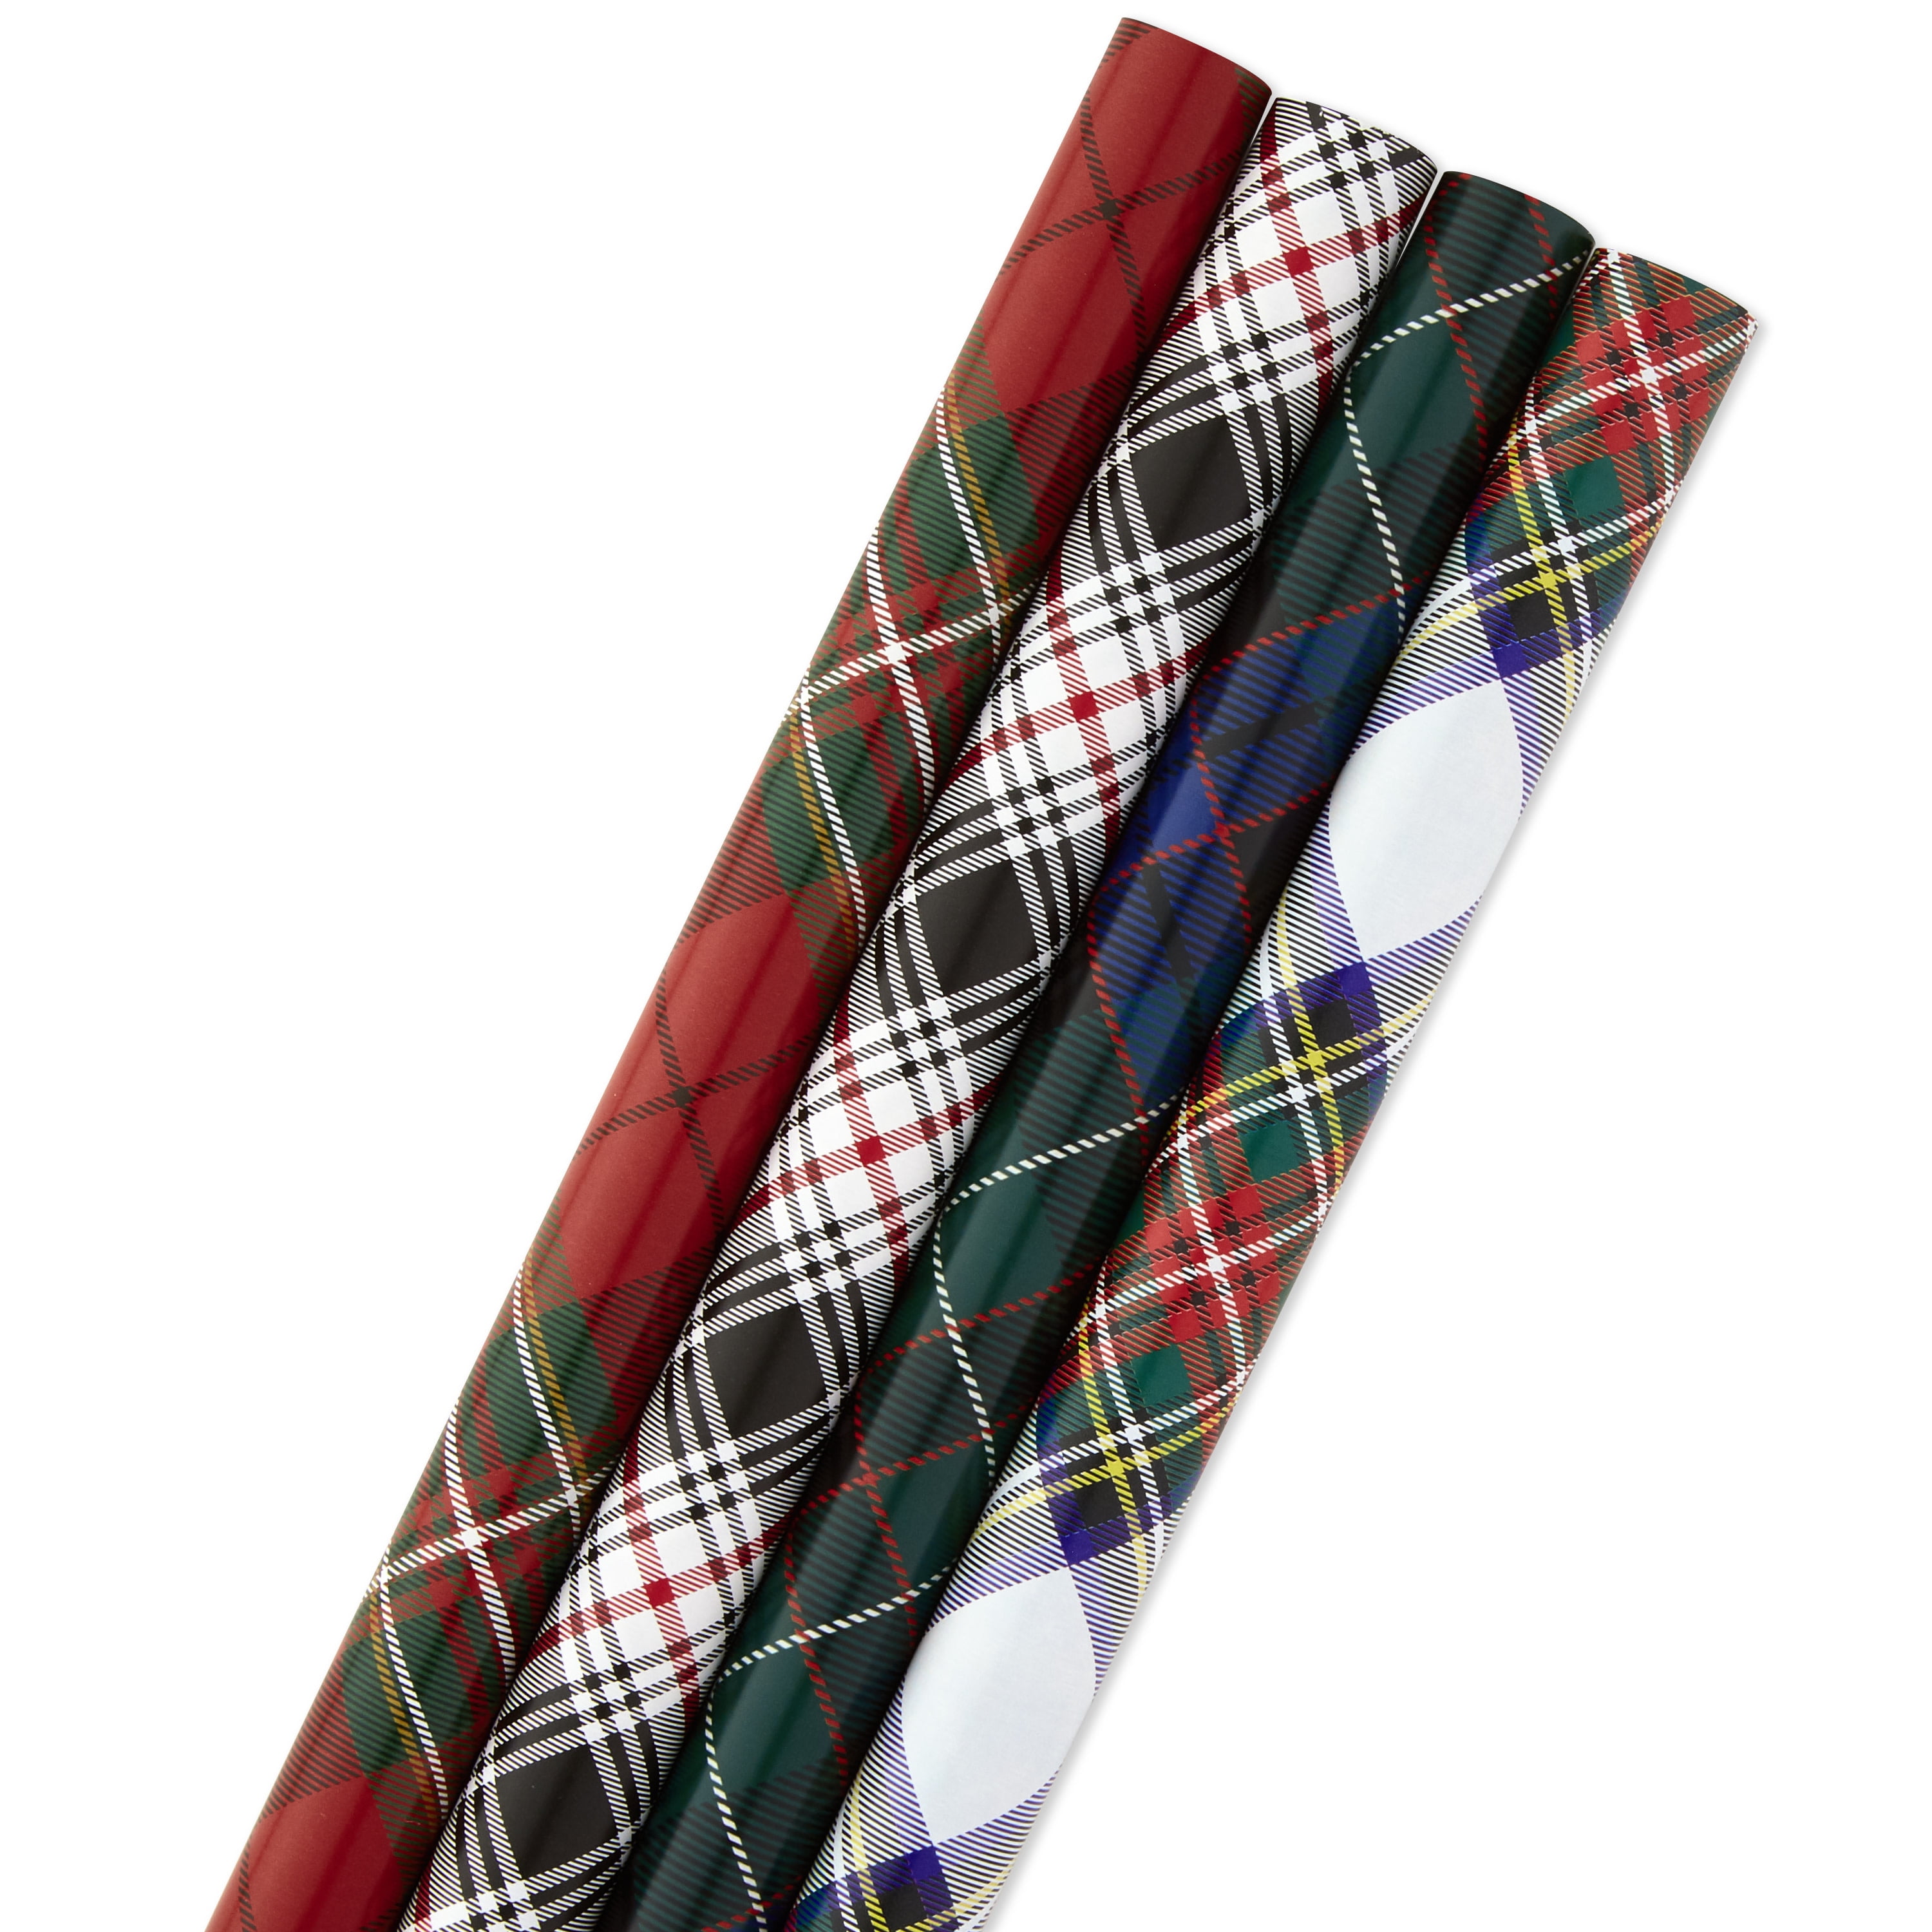 Details about   2 PKGS HALLMARK MULTI COLORED PLAID CHECKERBOARD PARTY GIFT WRAPPING PAPER 